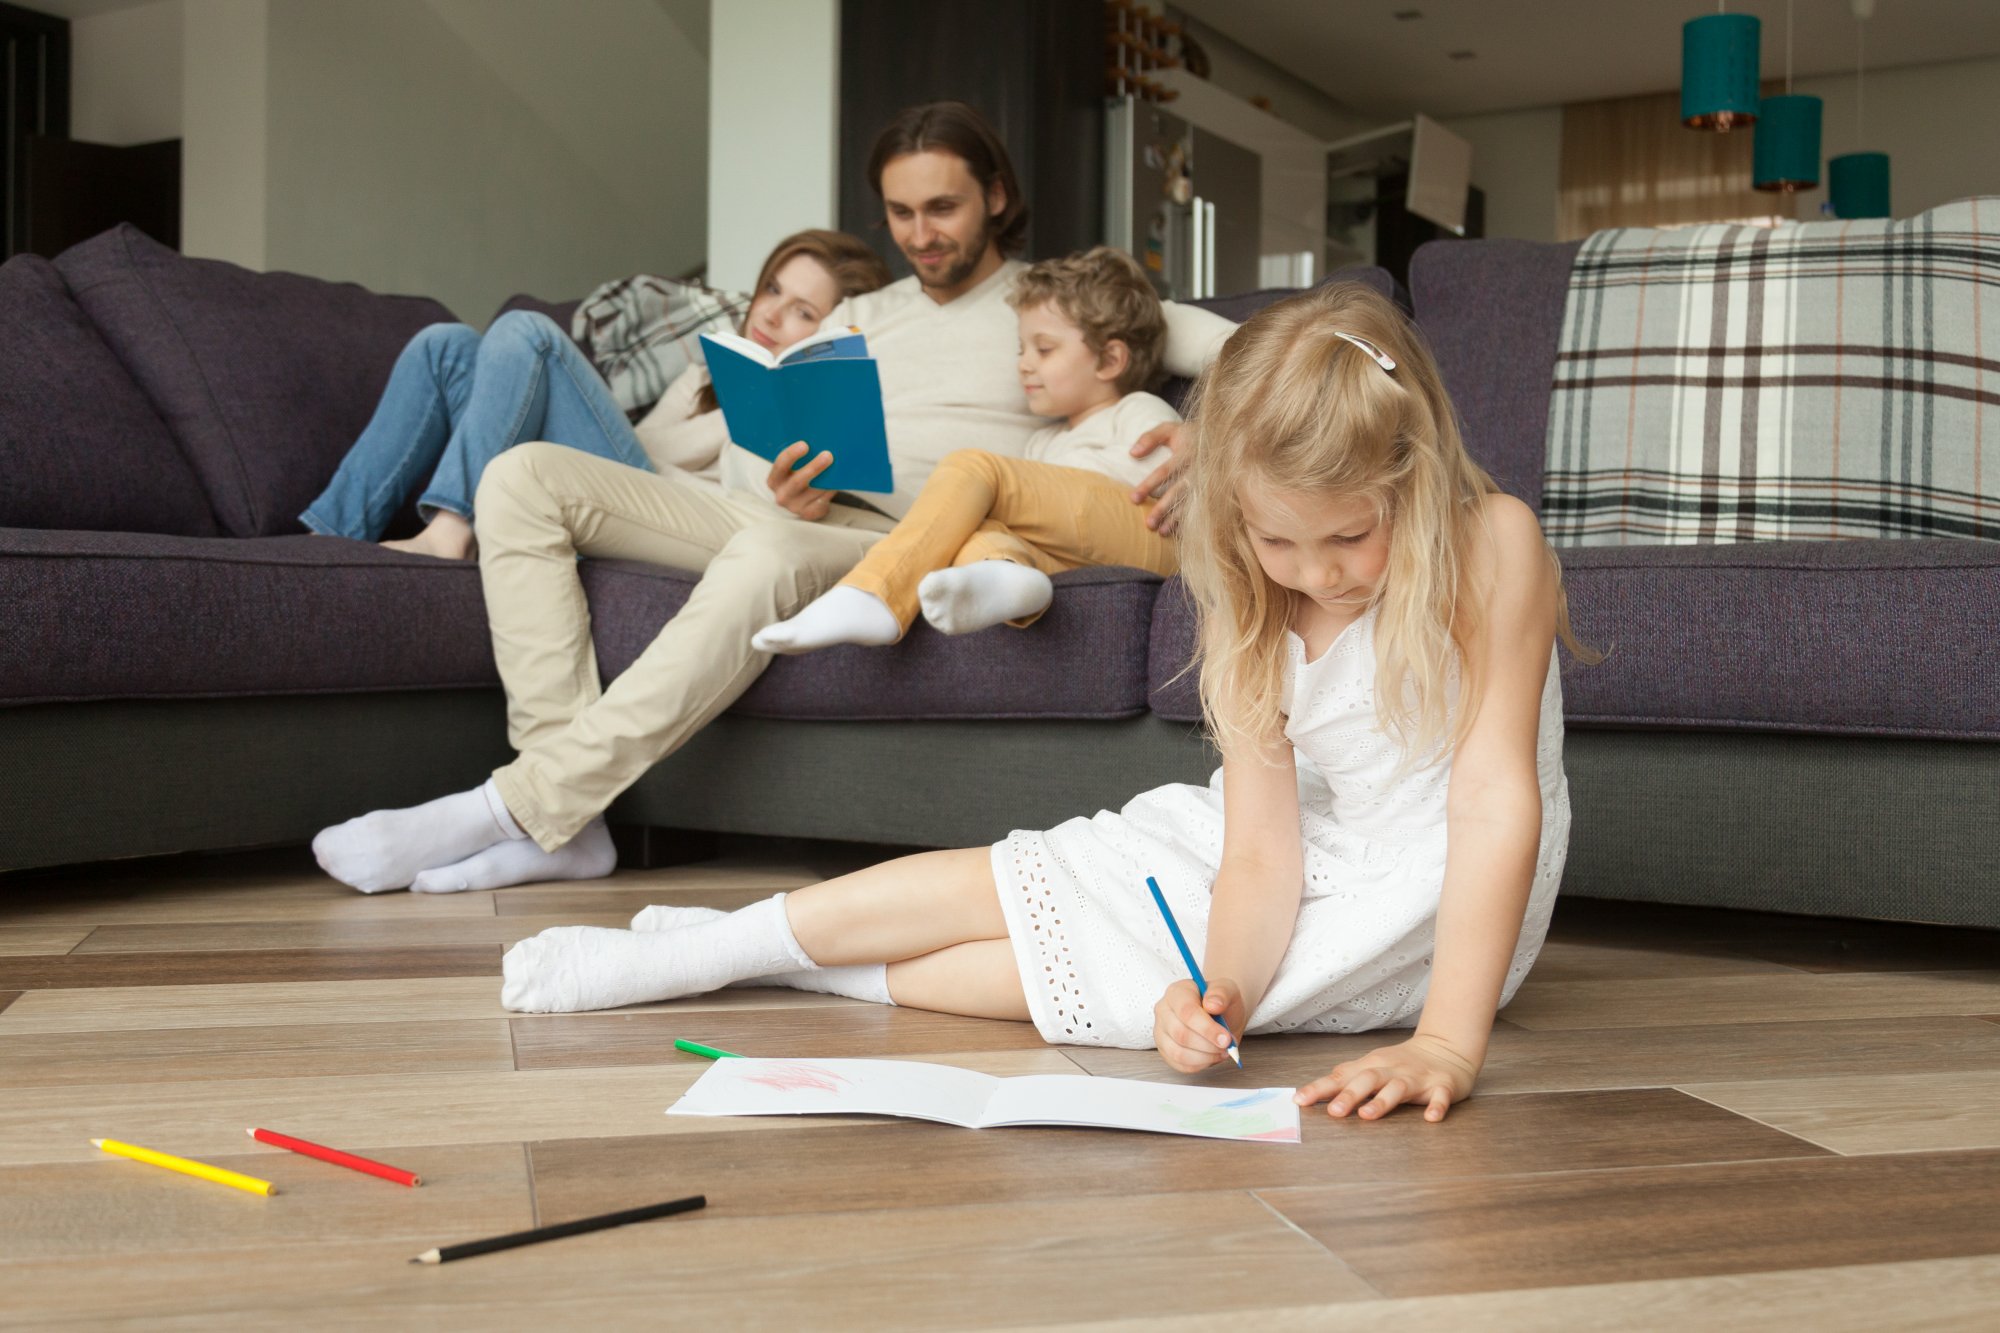 daughter-playing-floor-while-parents-son-reading-book.jpg